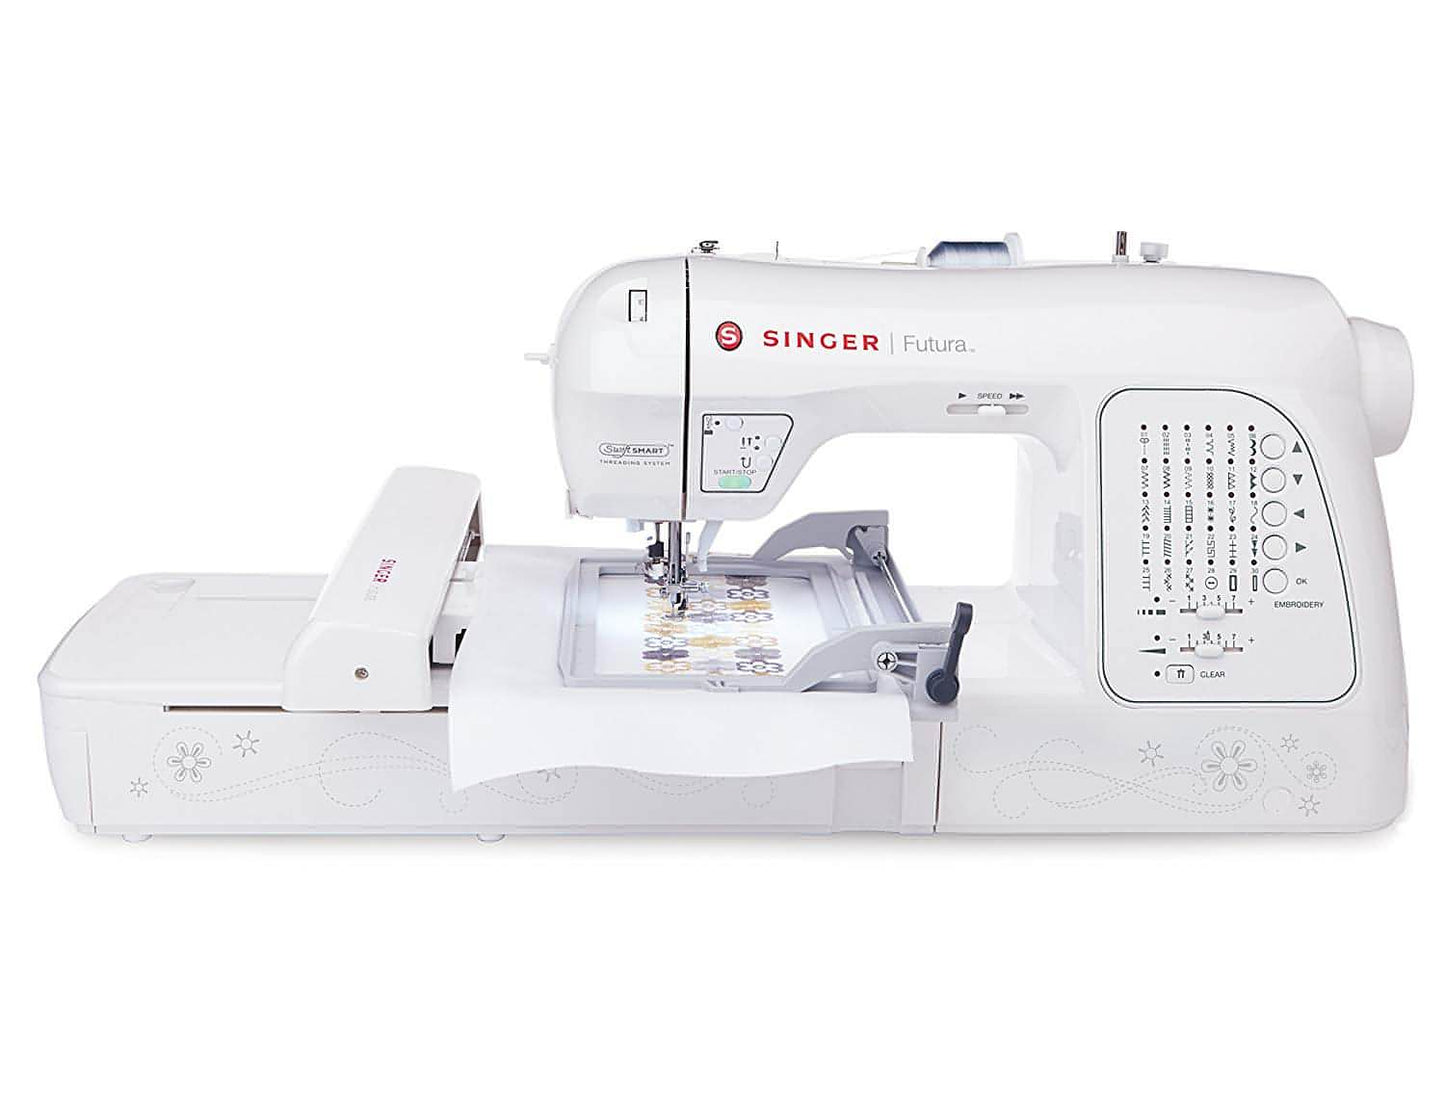 Singer Futura XL420 - Sewing & Embroidery Machine - Good as New